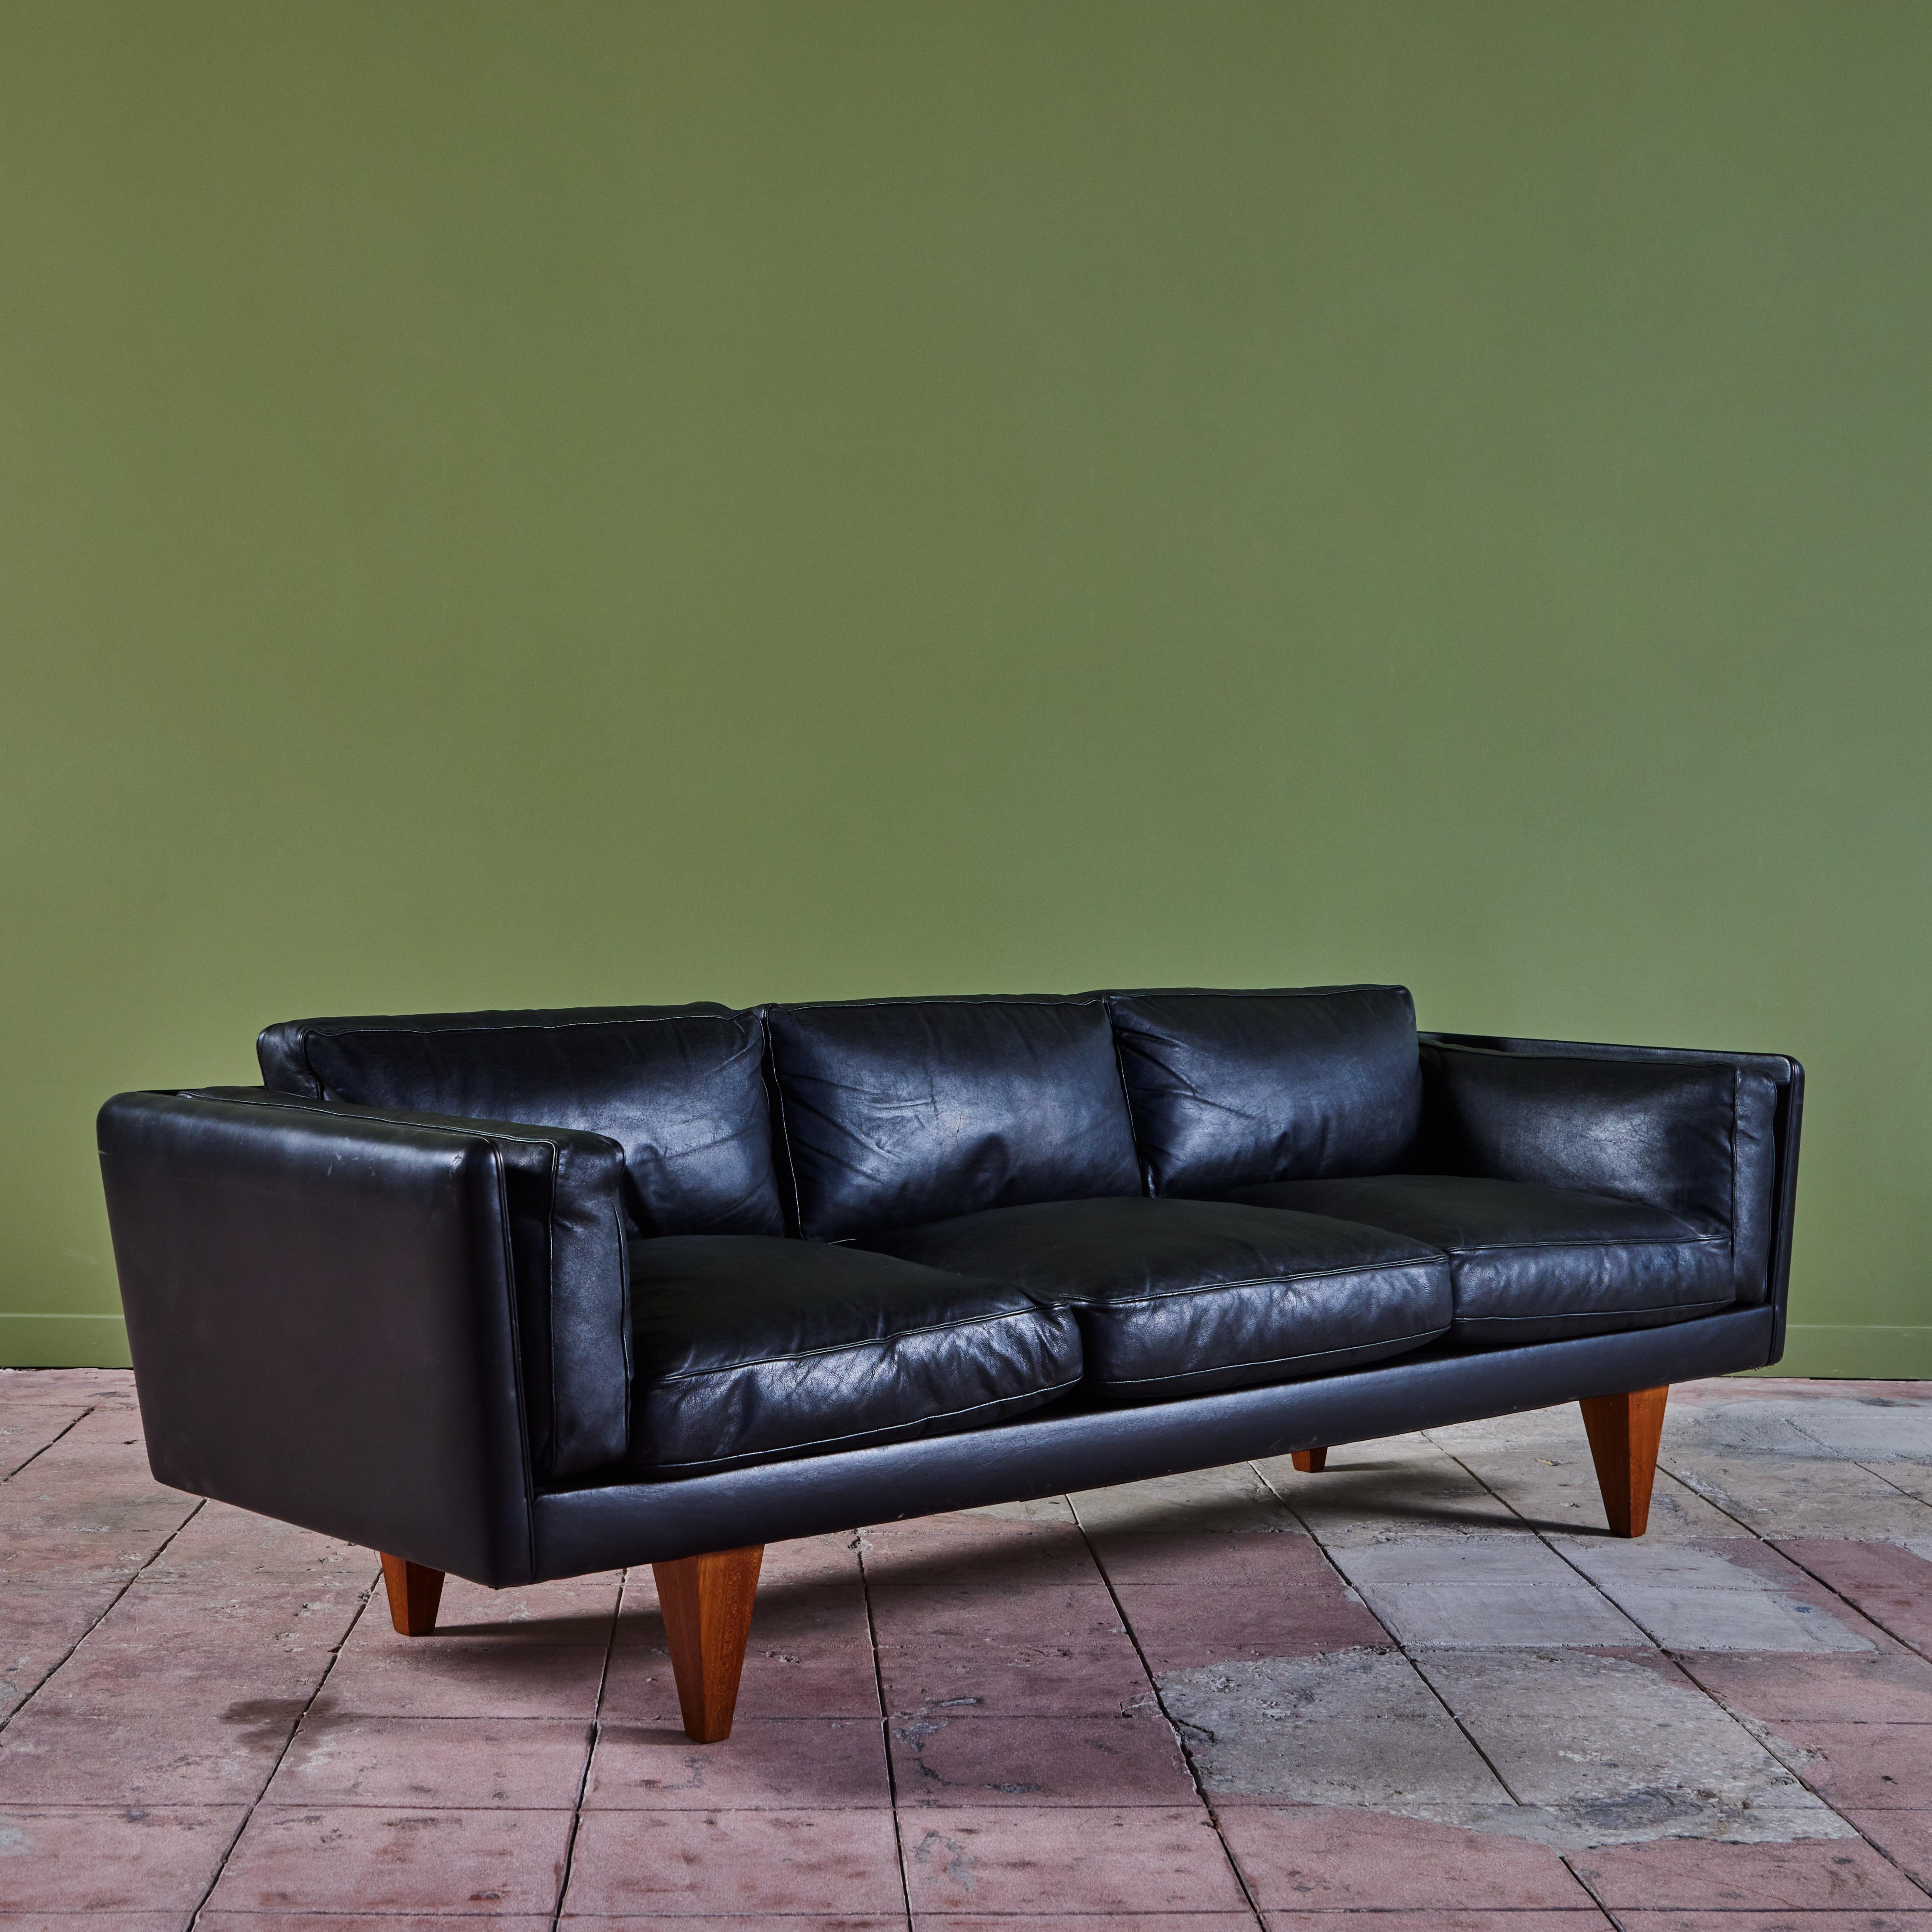 Designed in 1960's by Danish designer, Illum Wikkelsø for Holger Christiansen, this three seater low profile sofa features the original black leather upholstery.  The sofa sits atop four pyramid shaped wooden legs. 

Dimensions
90” width x 33” depth